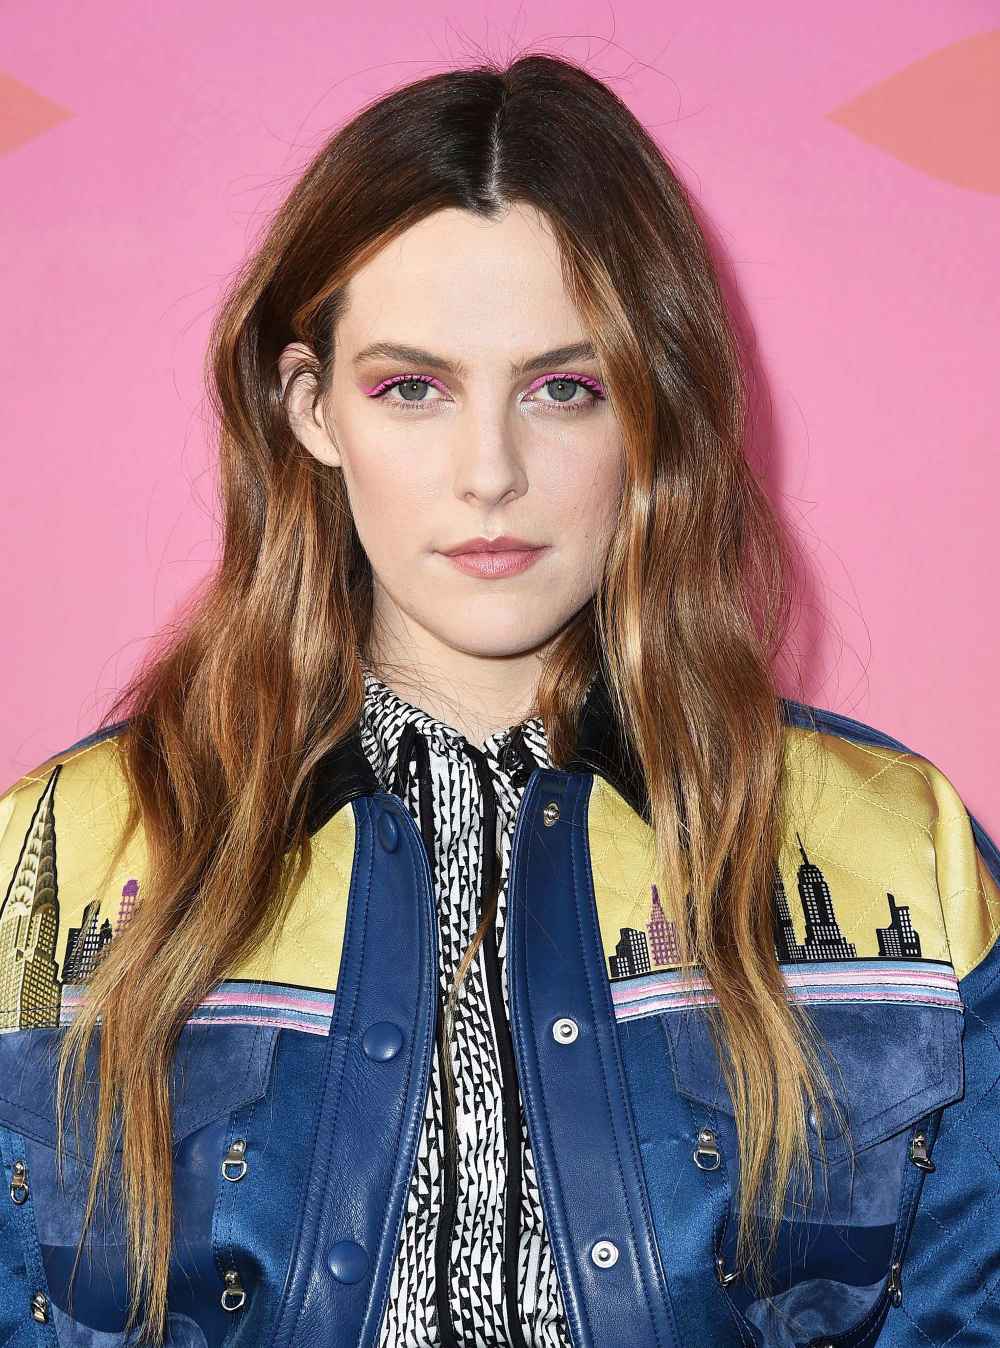 Riley Keough Gets Collarbone Tattoo Honoring Her Late Brother Benjamin: Pic